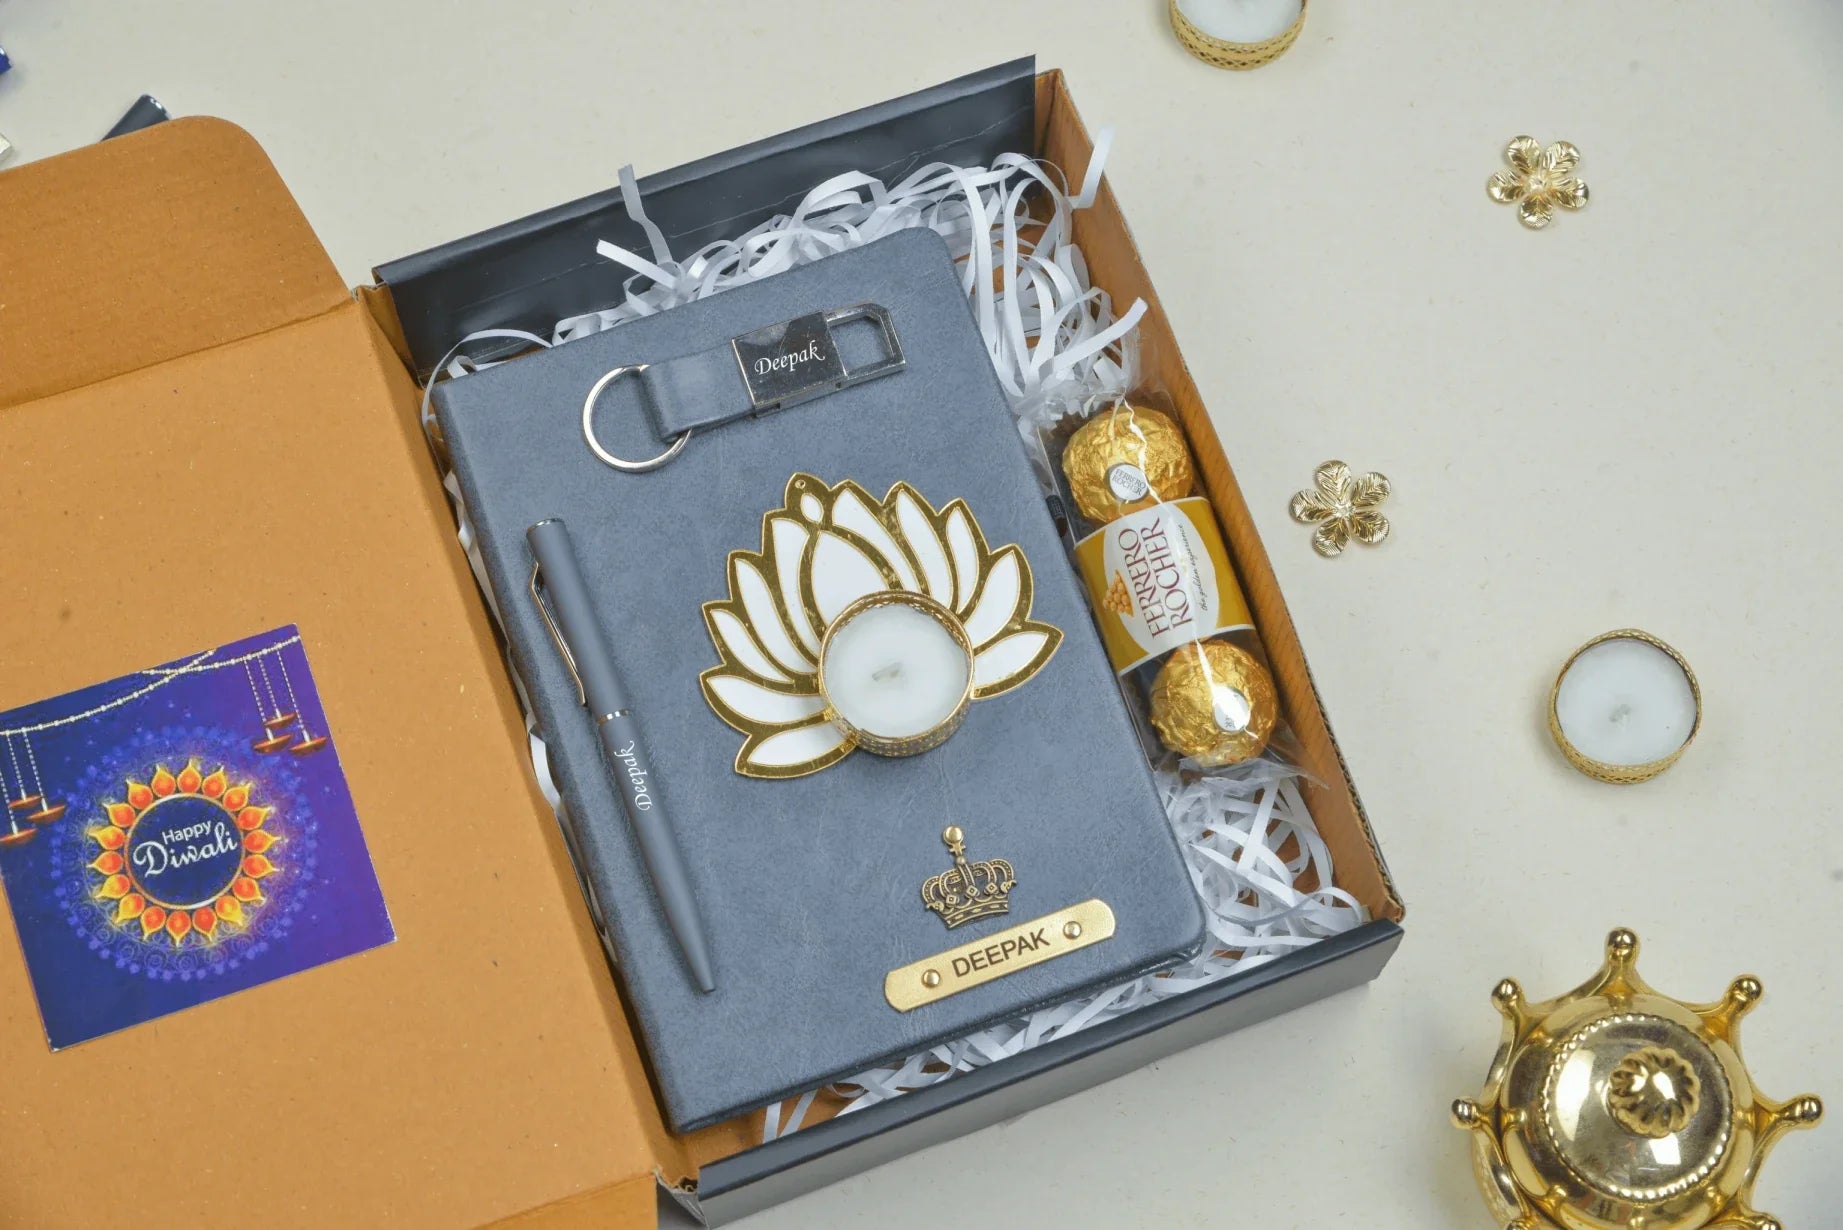 Make this Diwali unforgettable with our customizable Diwali combo. This set includes a premium quality diary, a beautifully crafted keychain, a traditional diya to spread light and joy, a selection of delicious chocolates, and a high-quality pen, all personalized with your unique message and design.